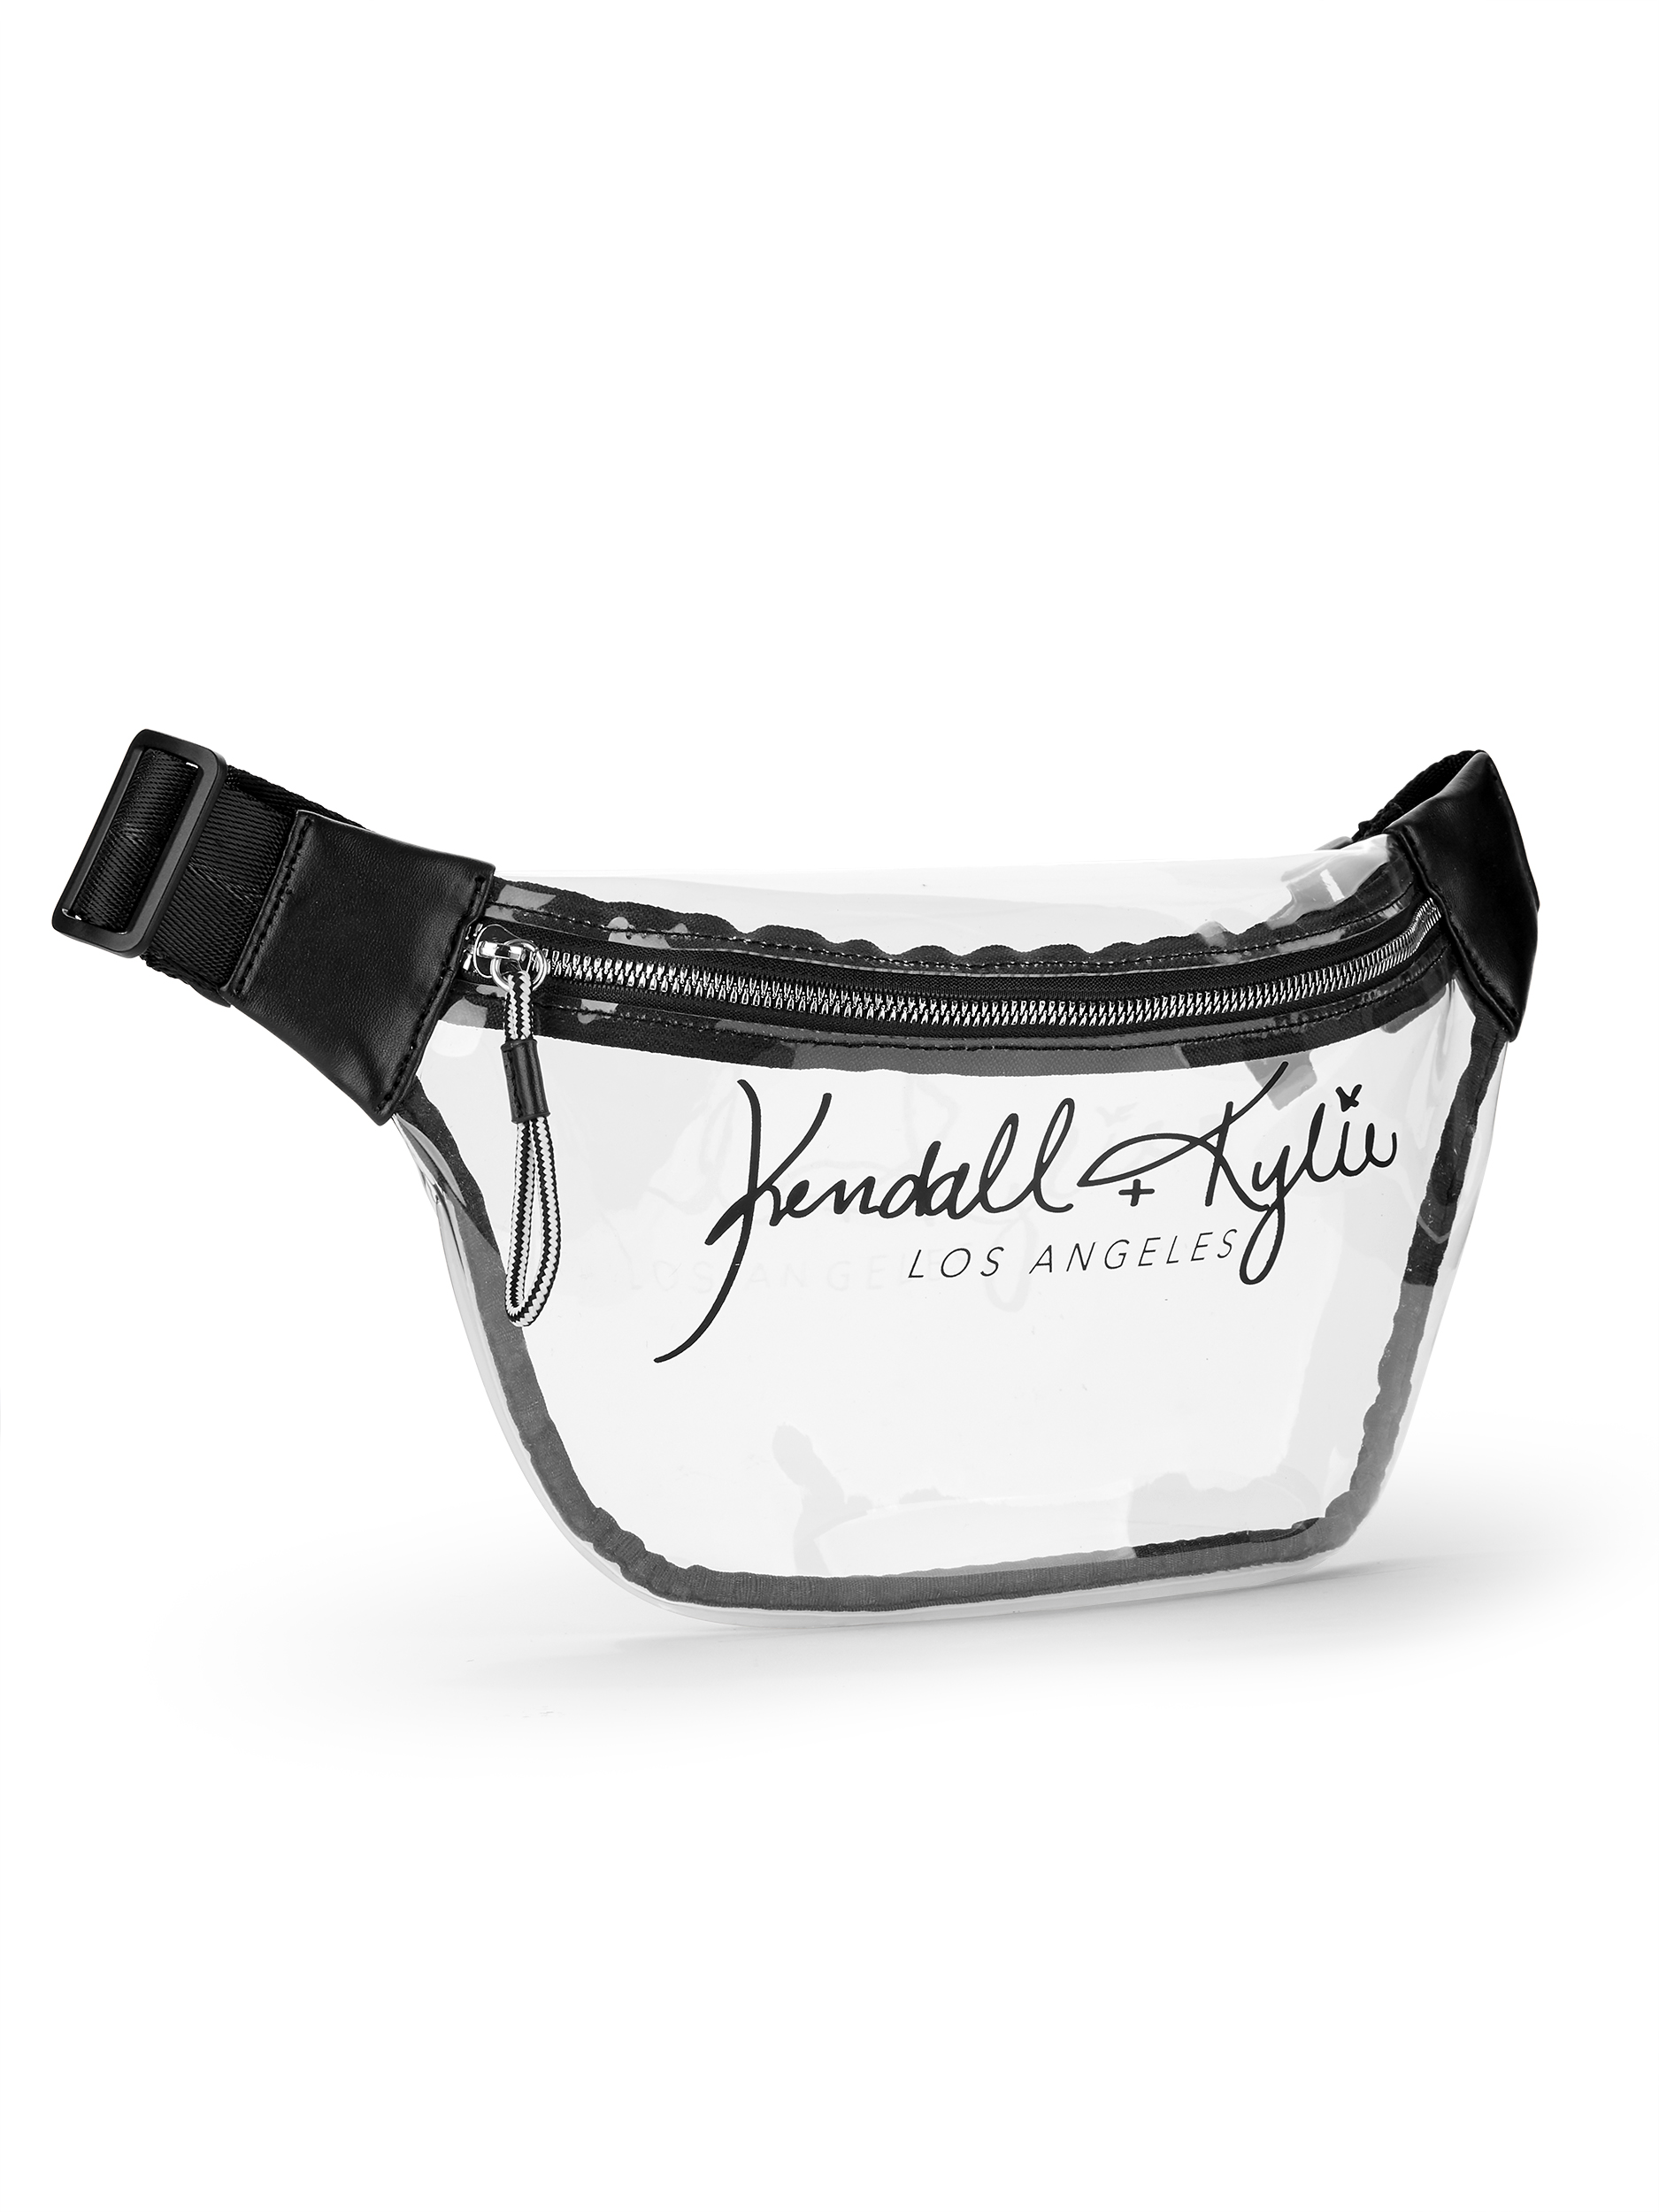 Kendall + Kylie for Walmart Clear Lucite Large Fanny Pack - image 3 of 5